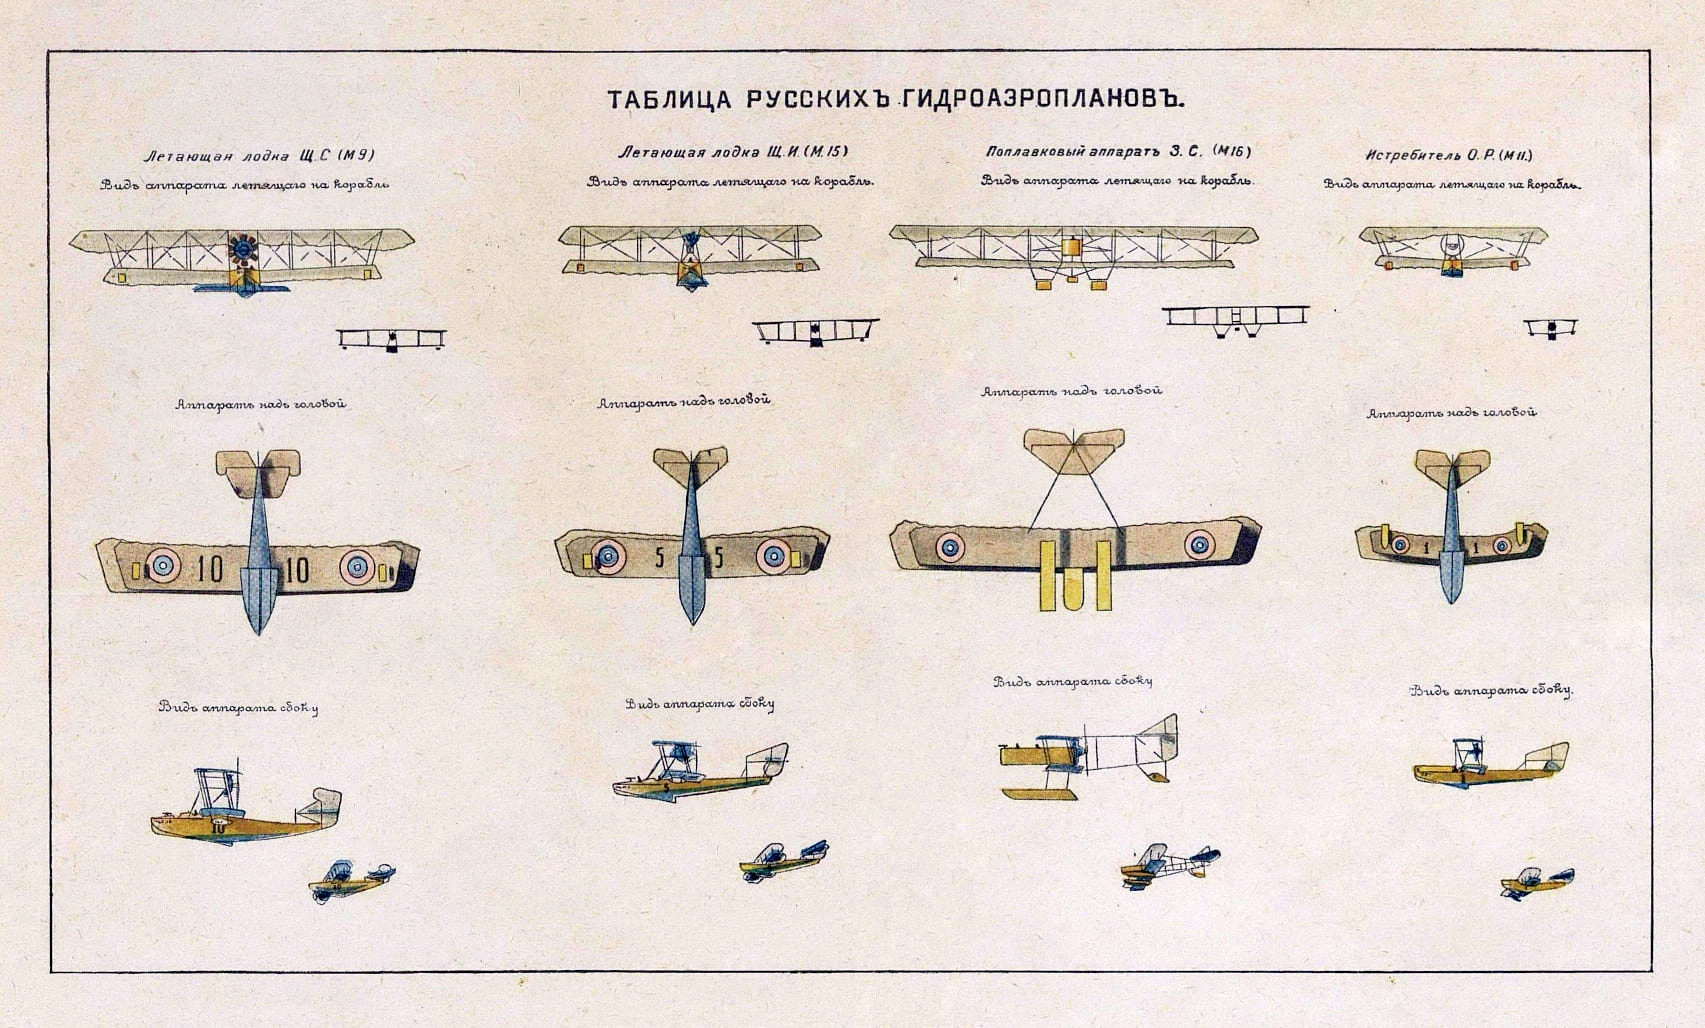 Russian hydroairplanes of WWI